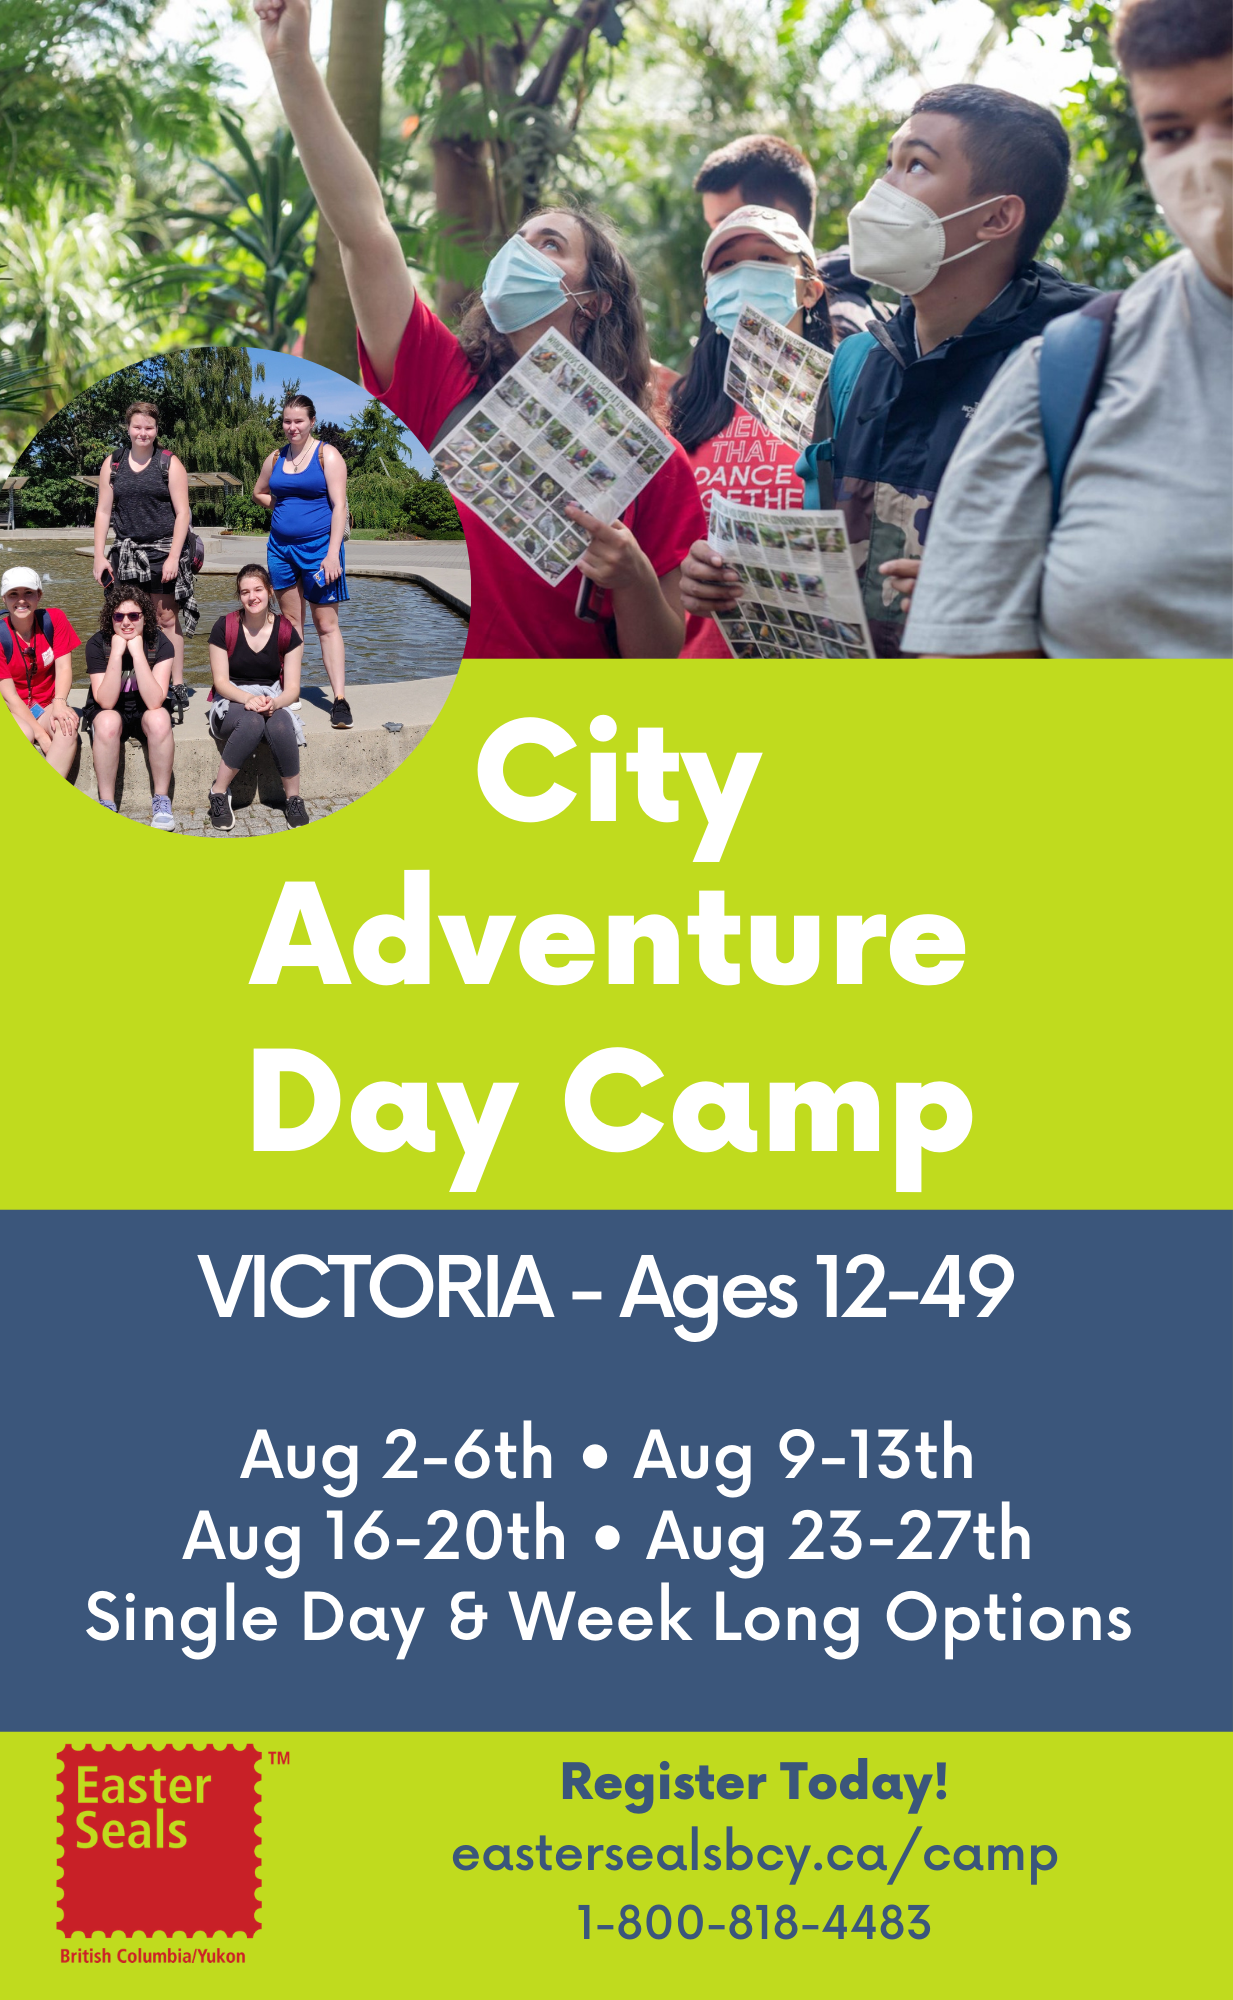 City Adventure Day Camp in Victoria - Single Day & Week Long Options (Ages 12-49)